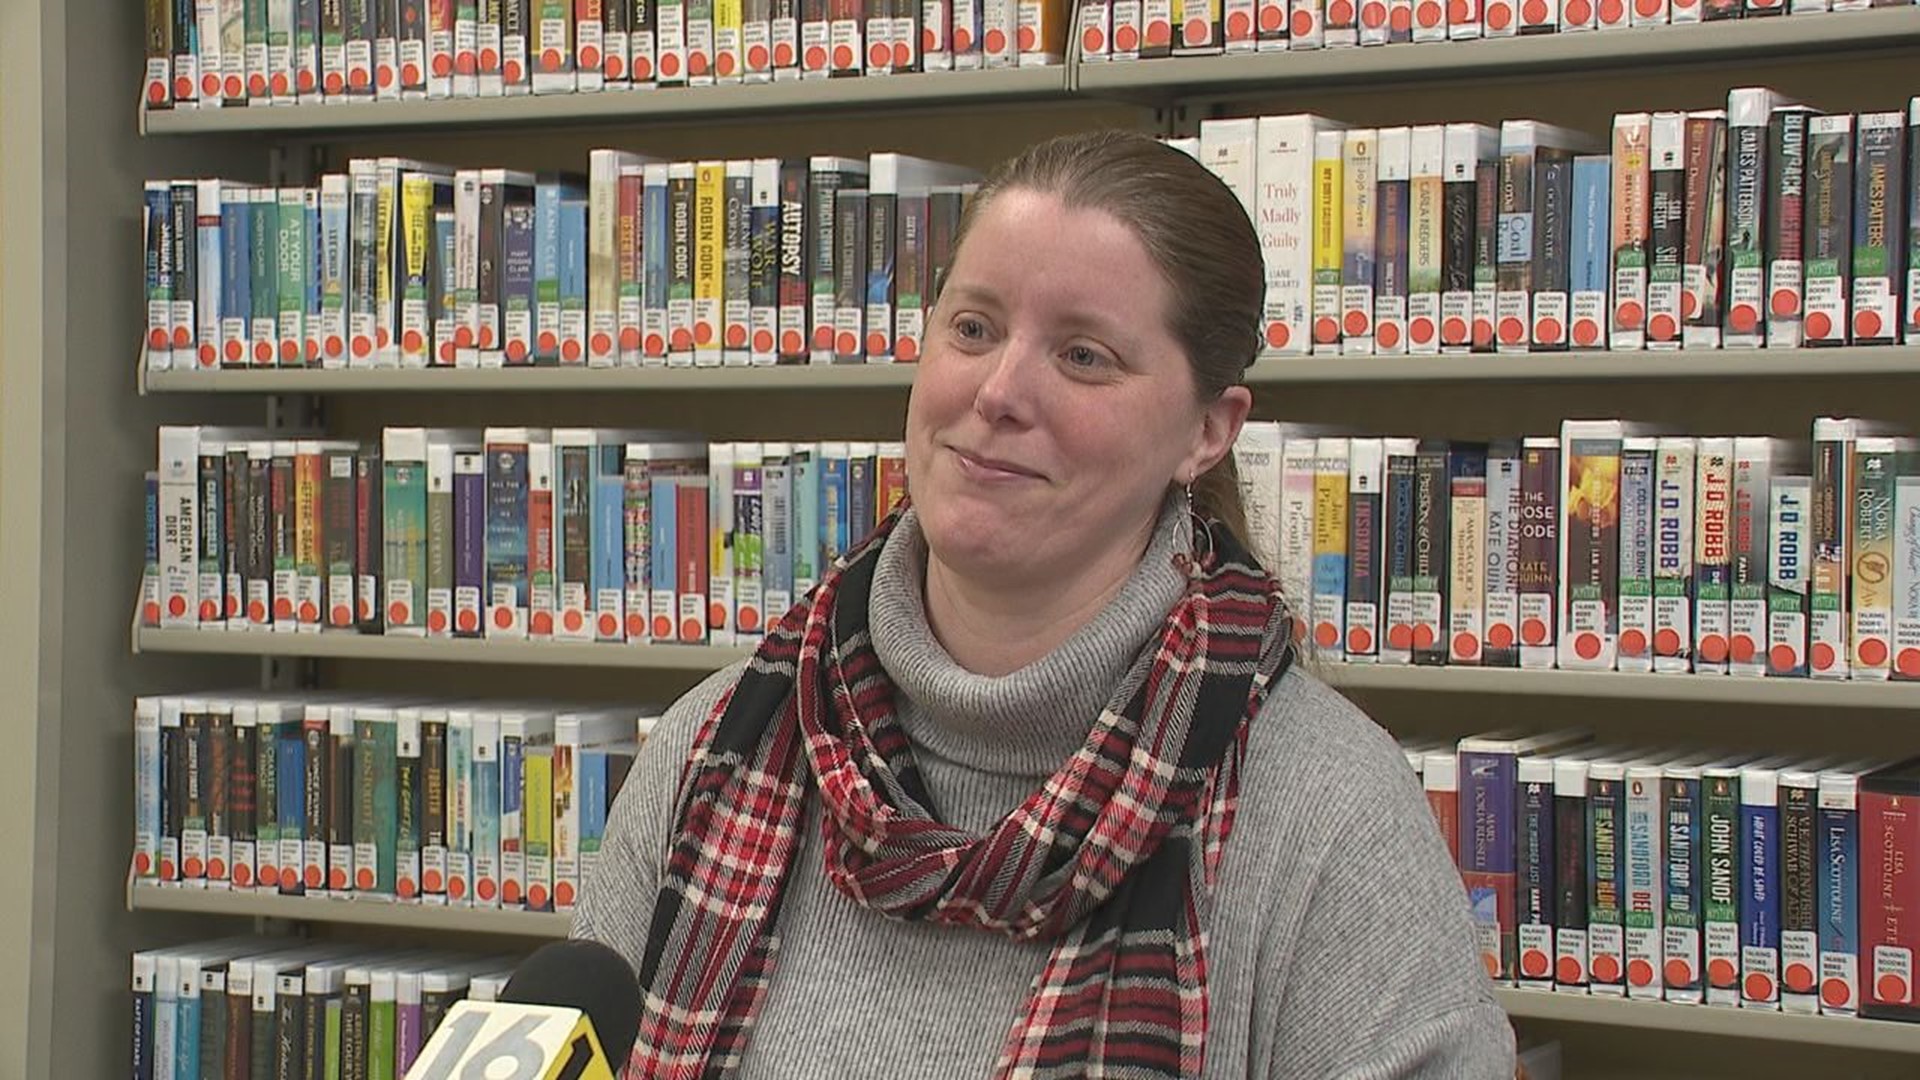 Full interview about 120 year overdue book returned to the Carbondale Public Library